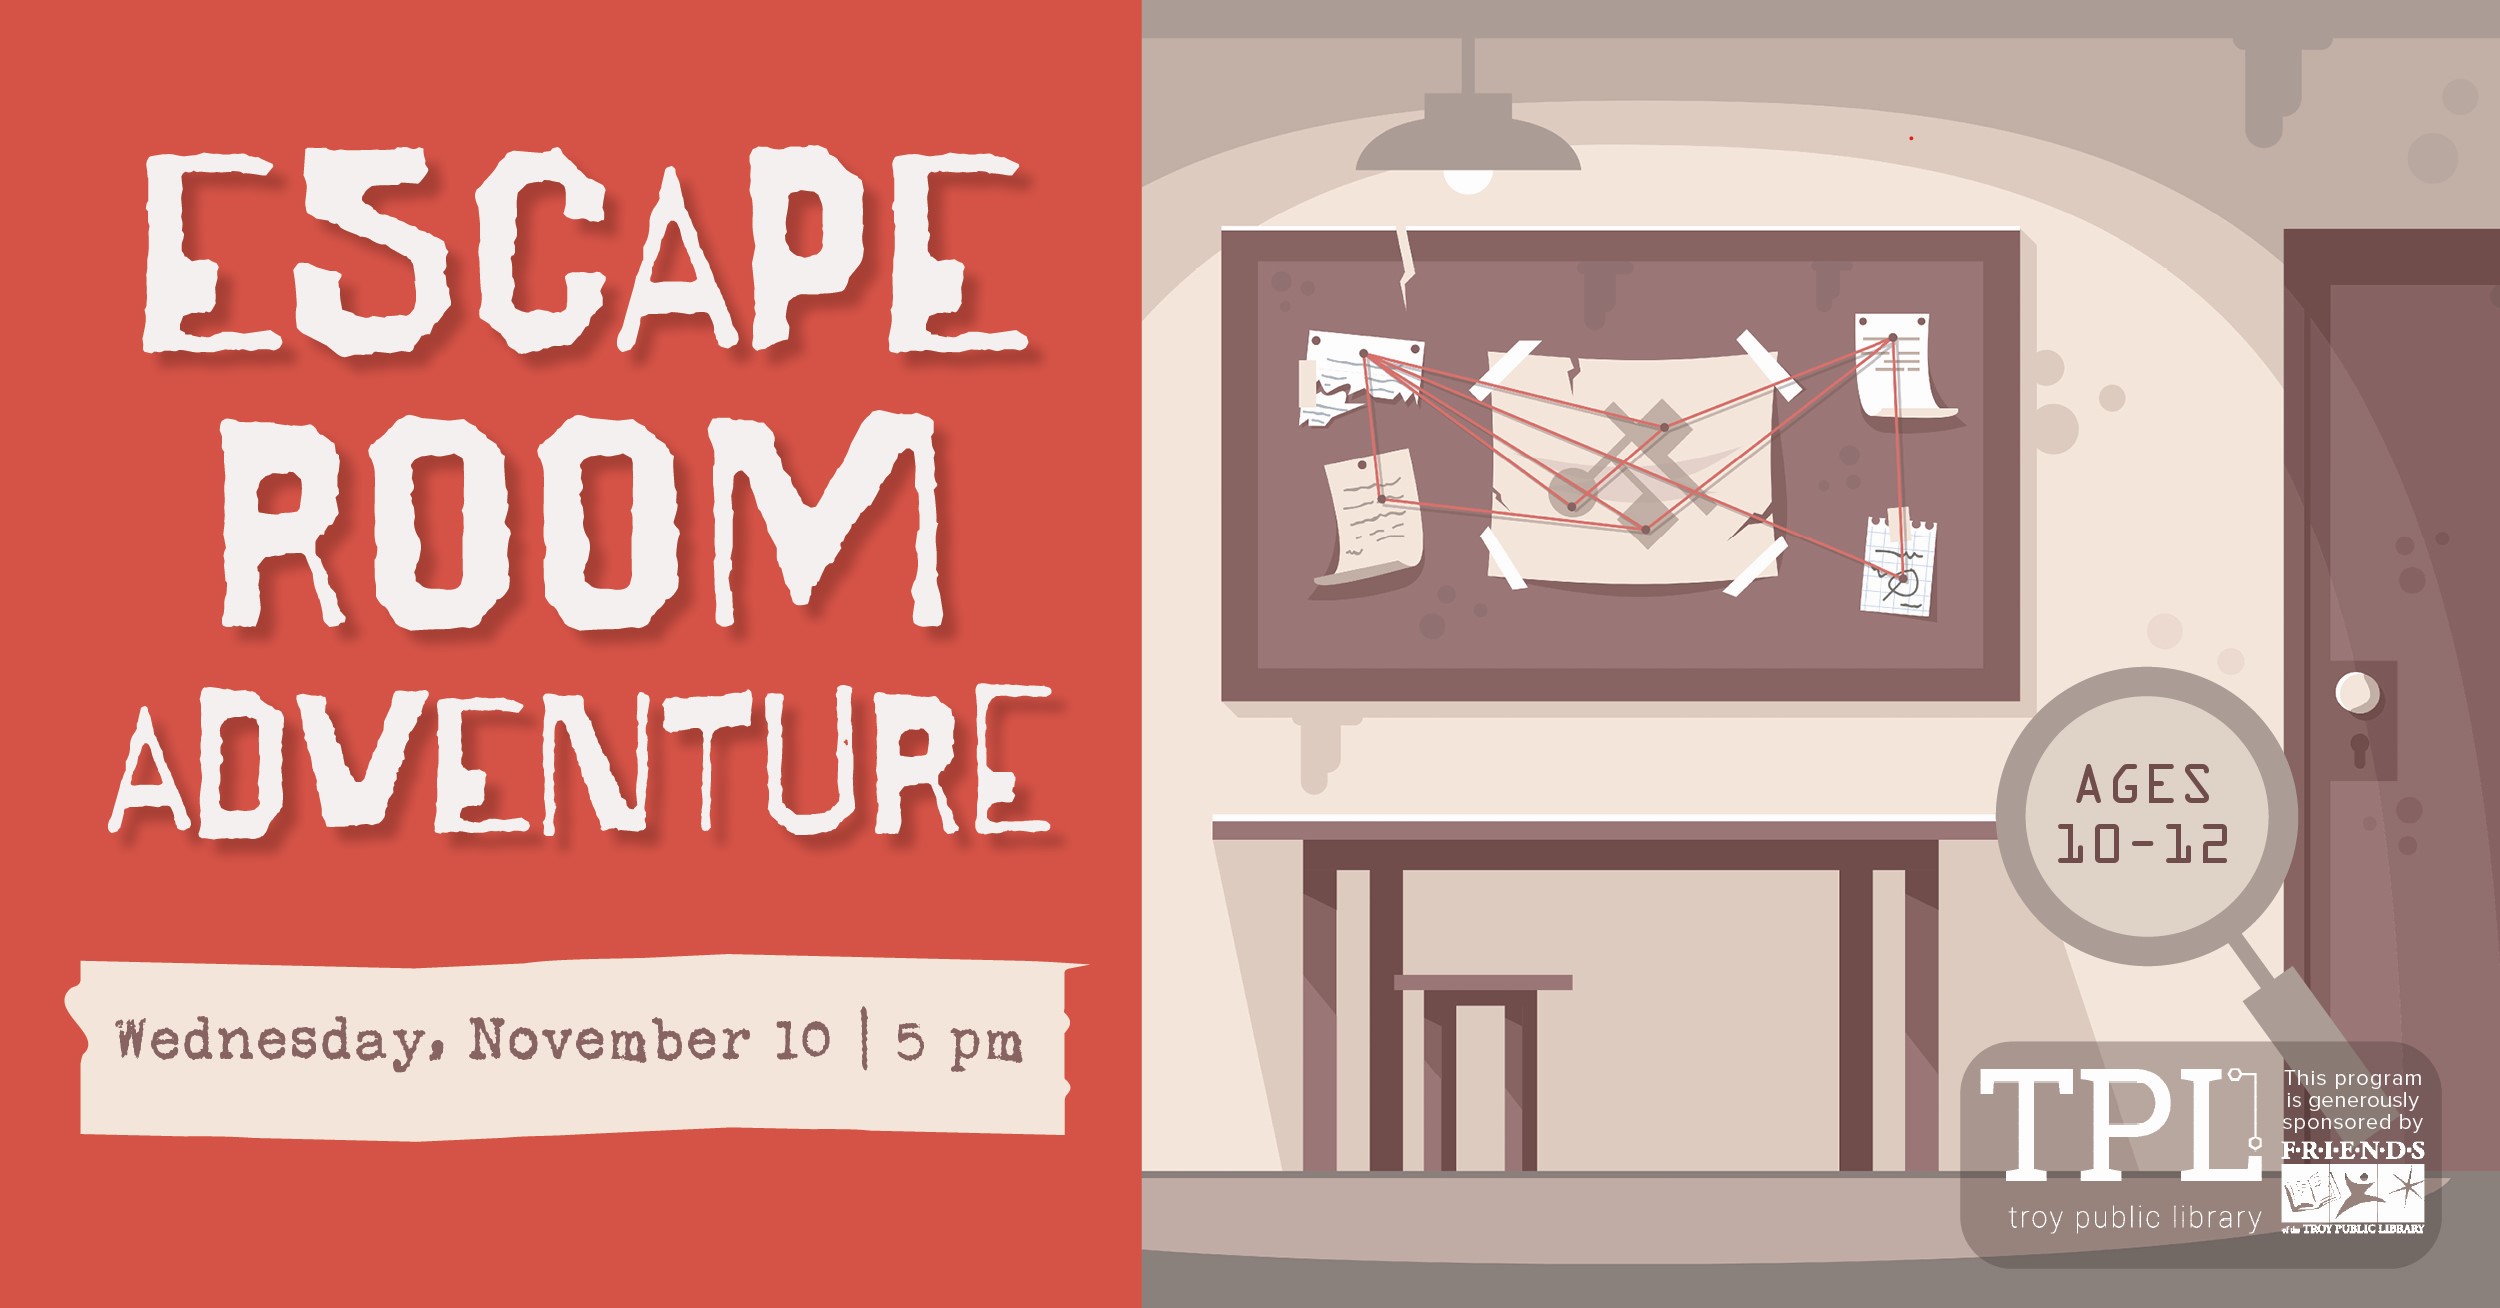 Escape Room Adventure. Wednesday November 10 at 5pm. Ages 10-12. Sponsored by the Friends of the Troy Public Library